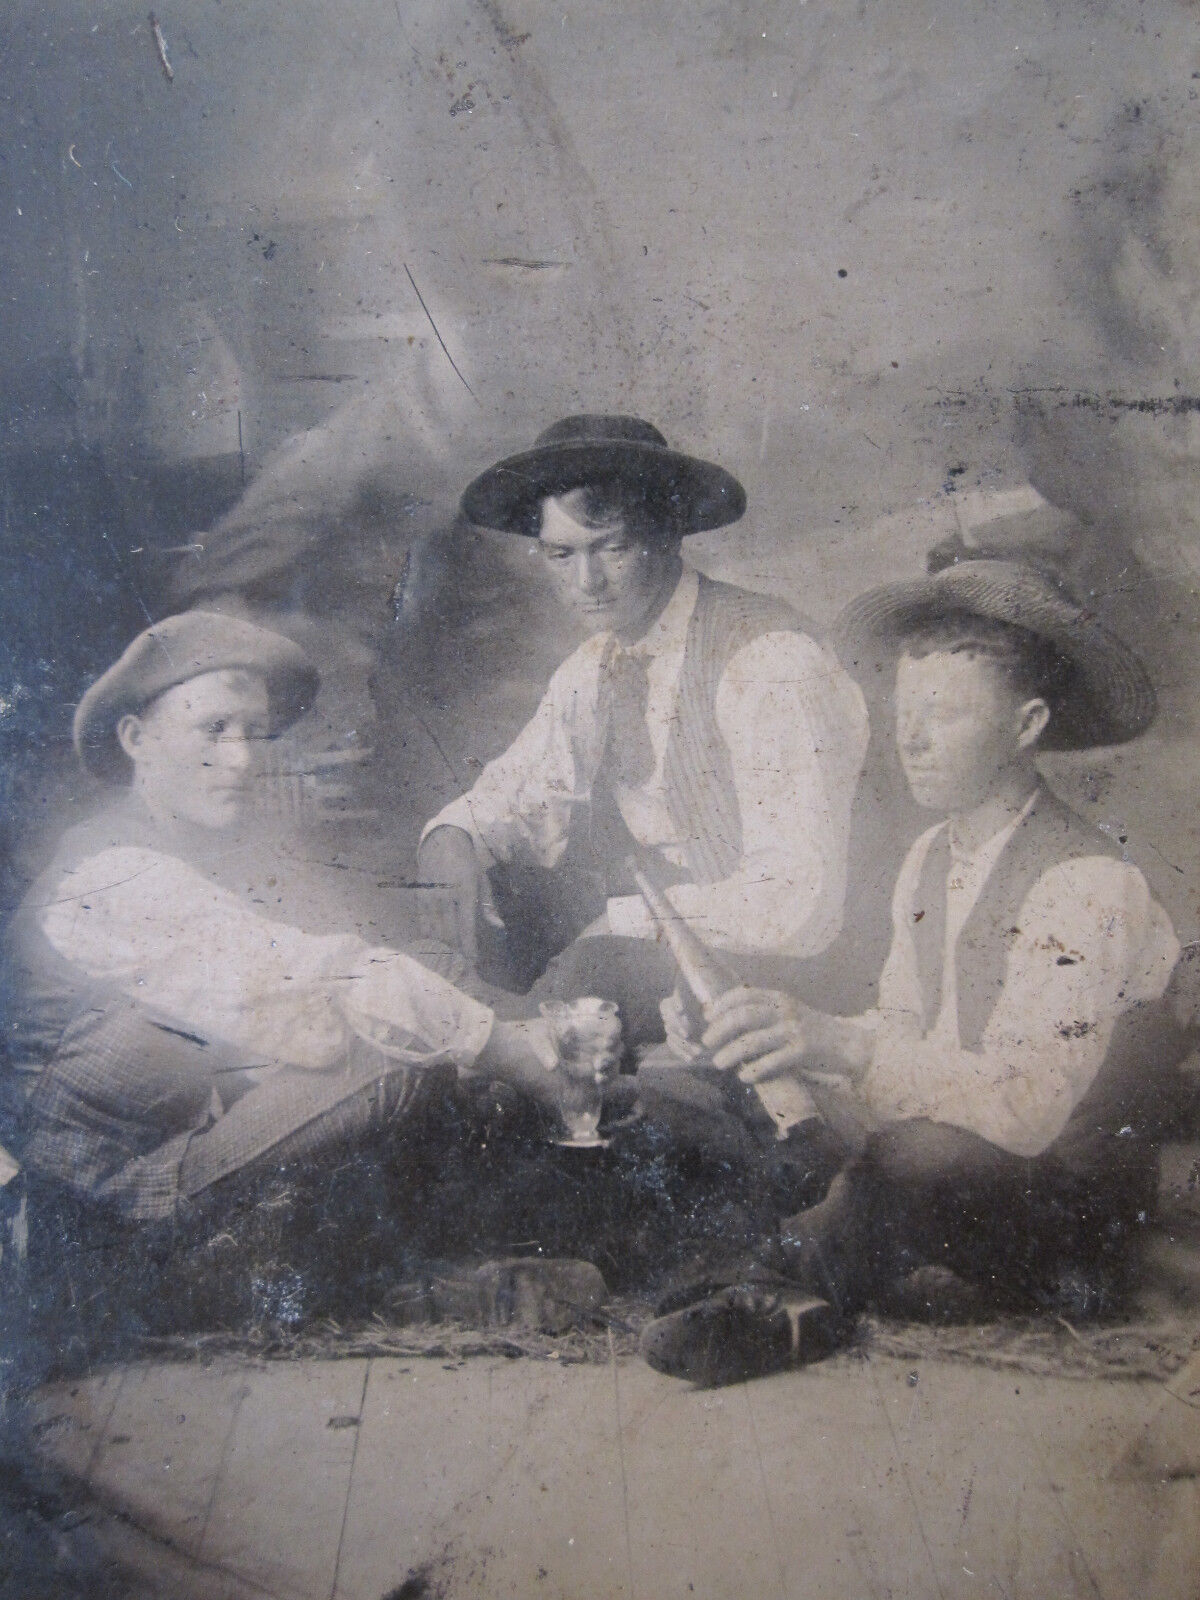 ANTIQUE AMERICAN ARTISTIC YOUNG MEN DRINKING WINE OR BEER ETHEREAL TINTYPE PHOTO